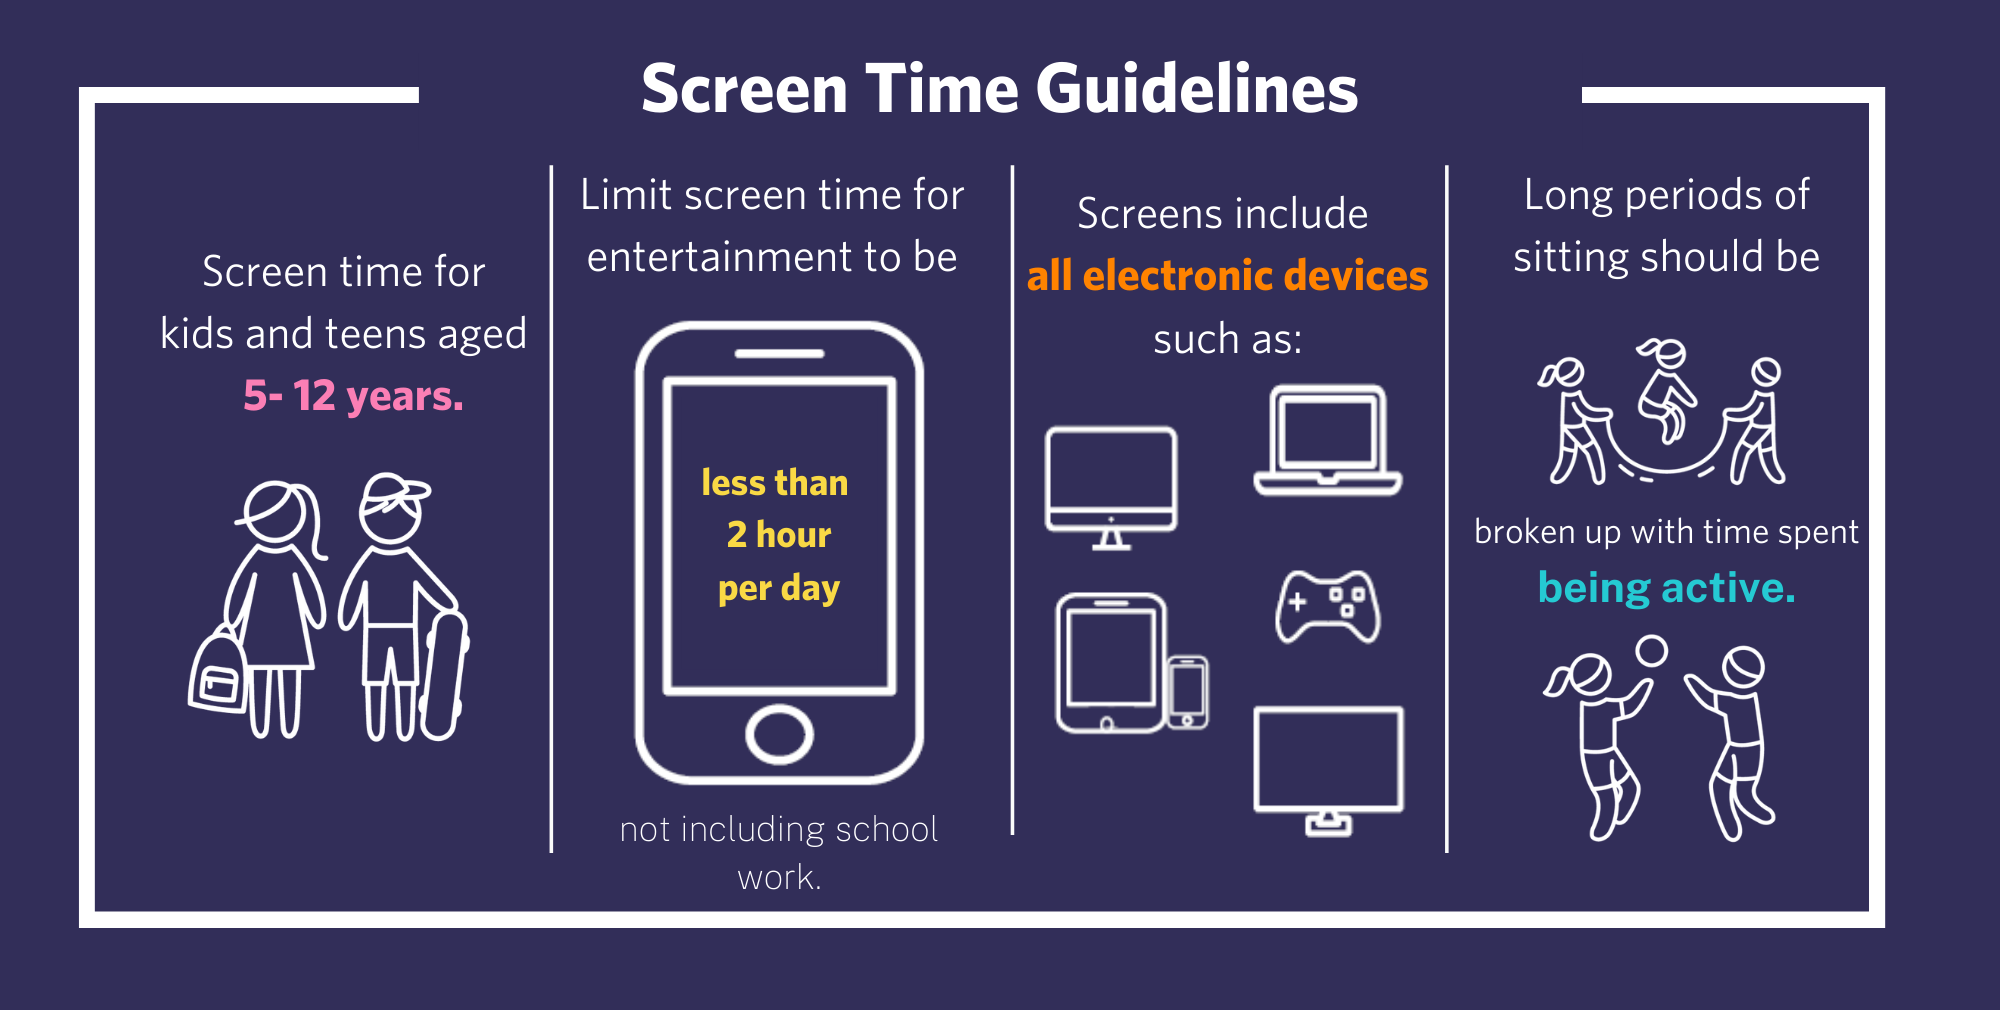 Screen Time Guidelines for Kids